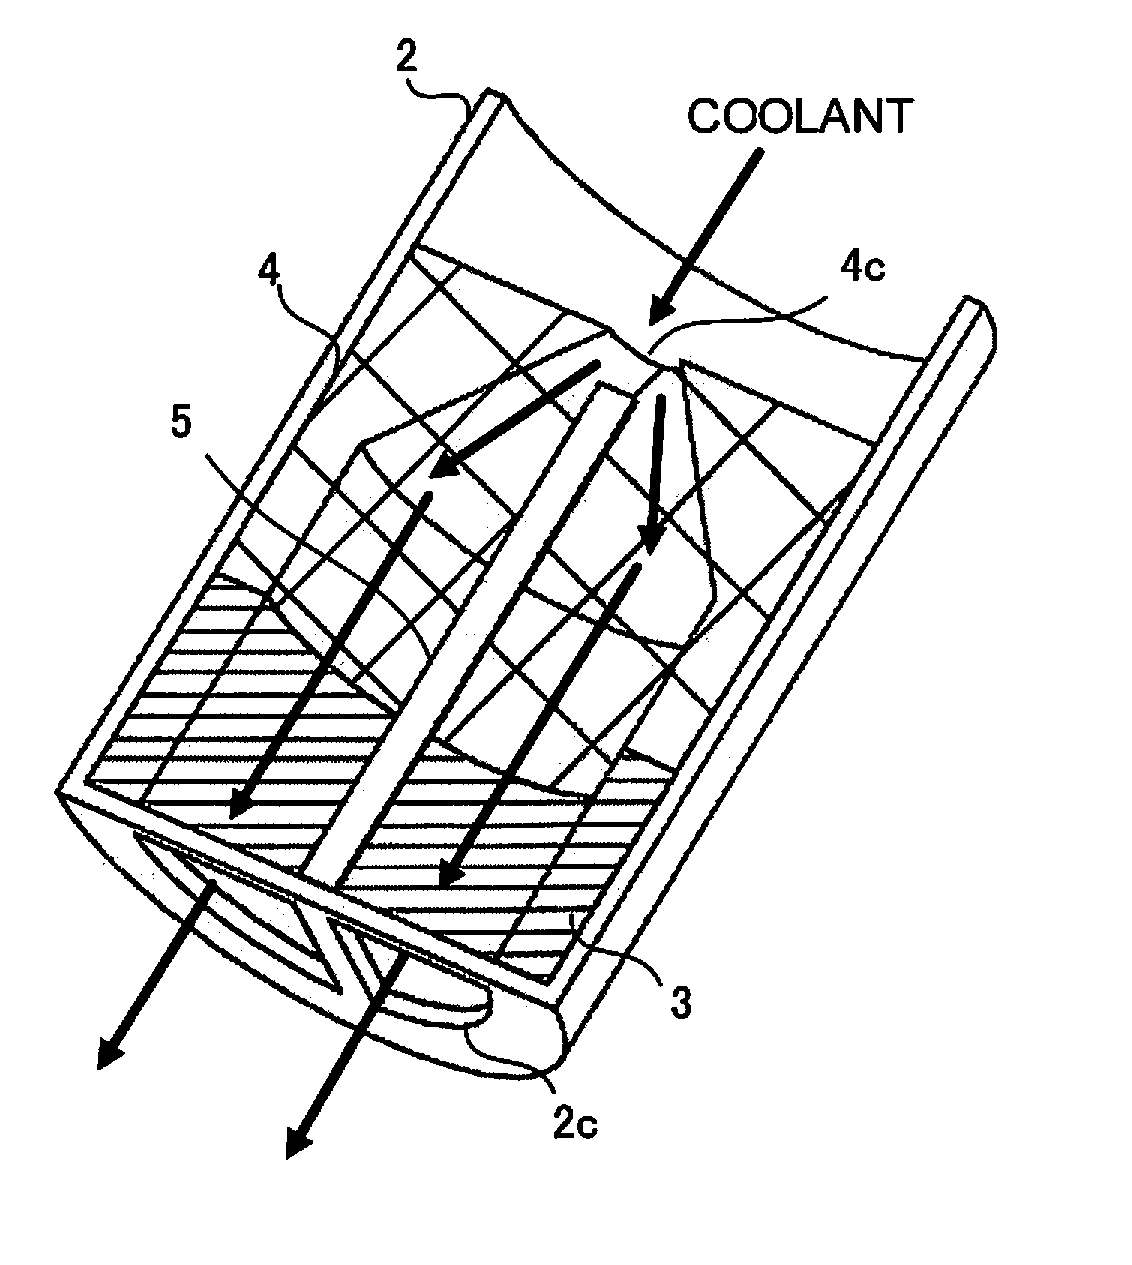 Coolant nozzle having function of automatically eliminating clogging by foreign matter